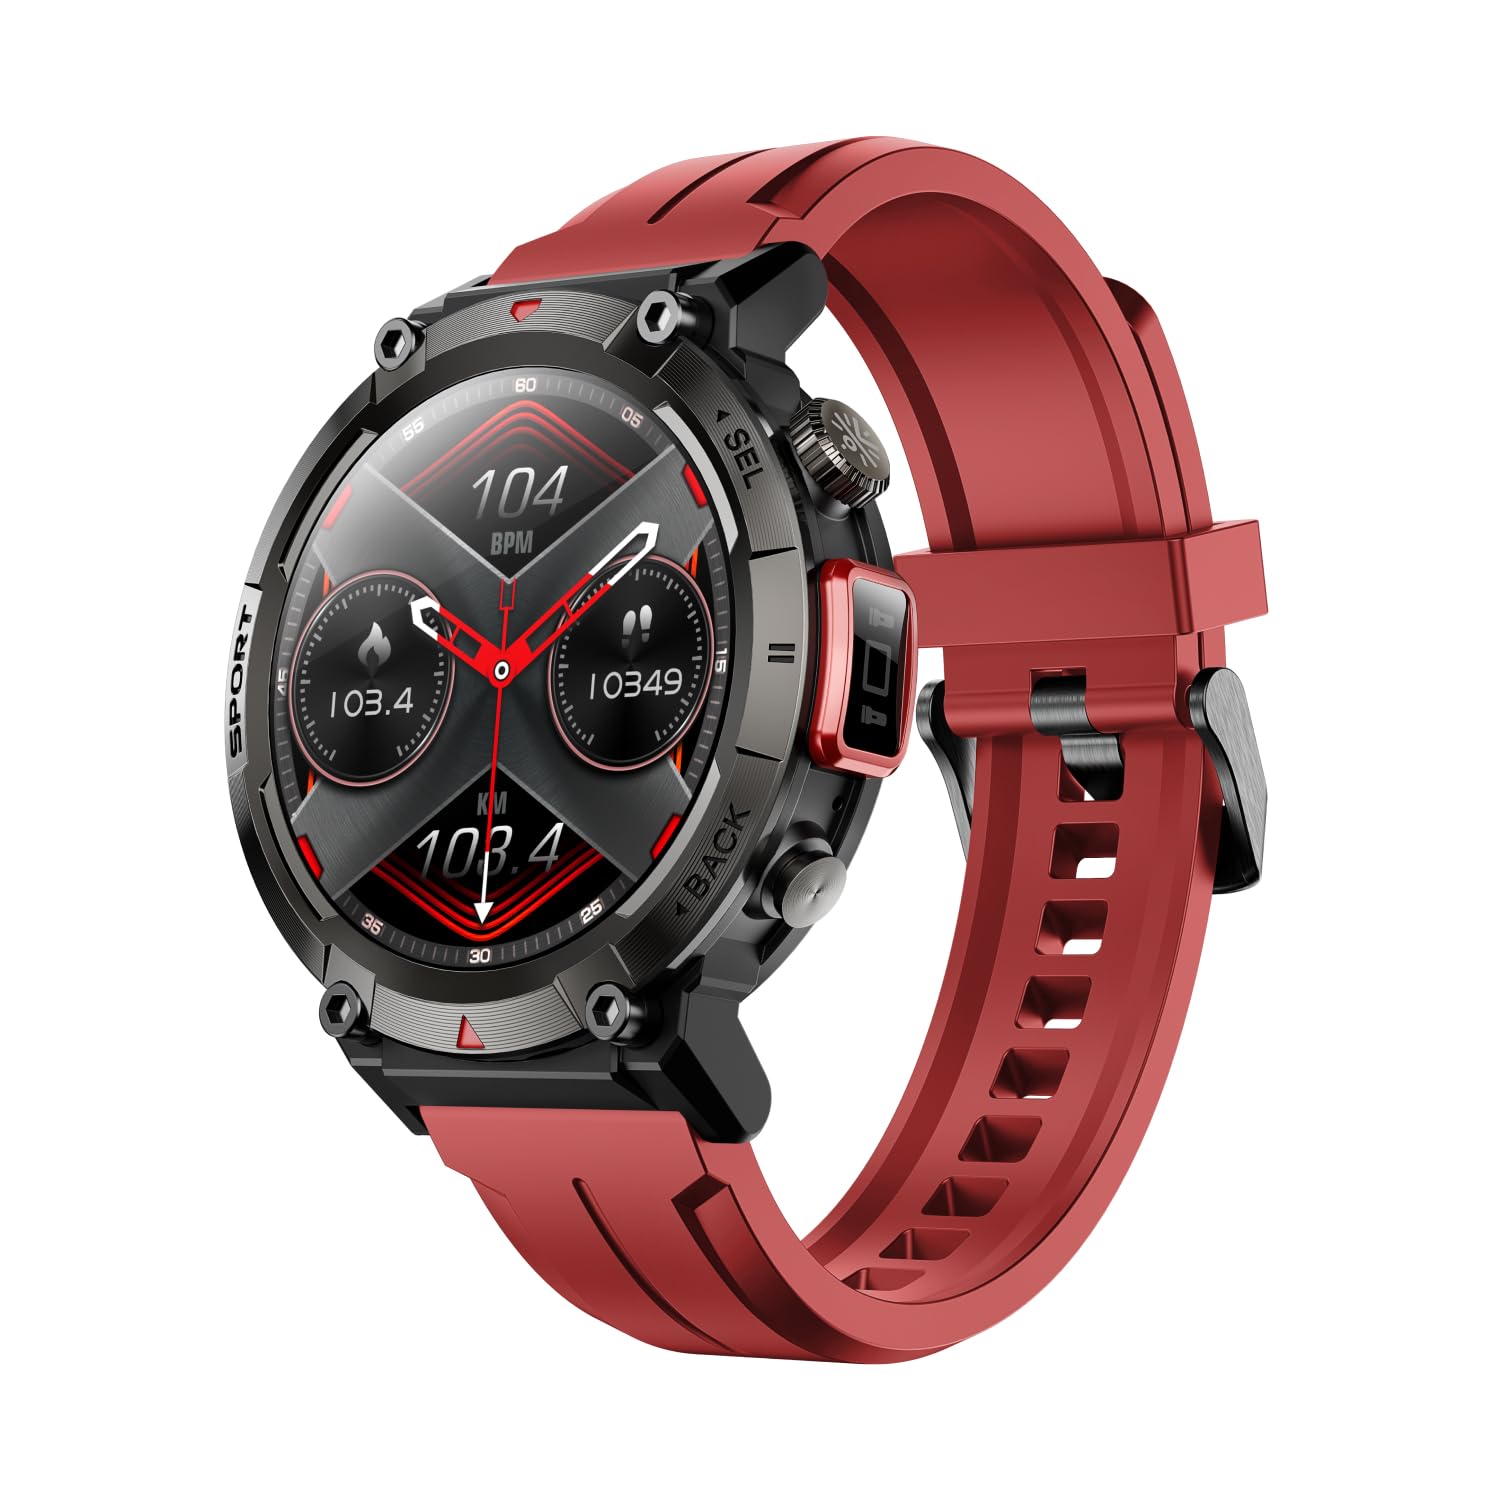 Cult.sport Ranger XR1 smartwatch with 1.43:inch AMOLED Always-on display, Bluetooth calling & 8 day battery life launched in India - News - News